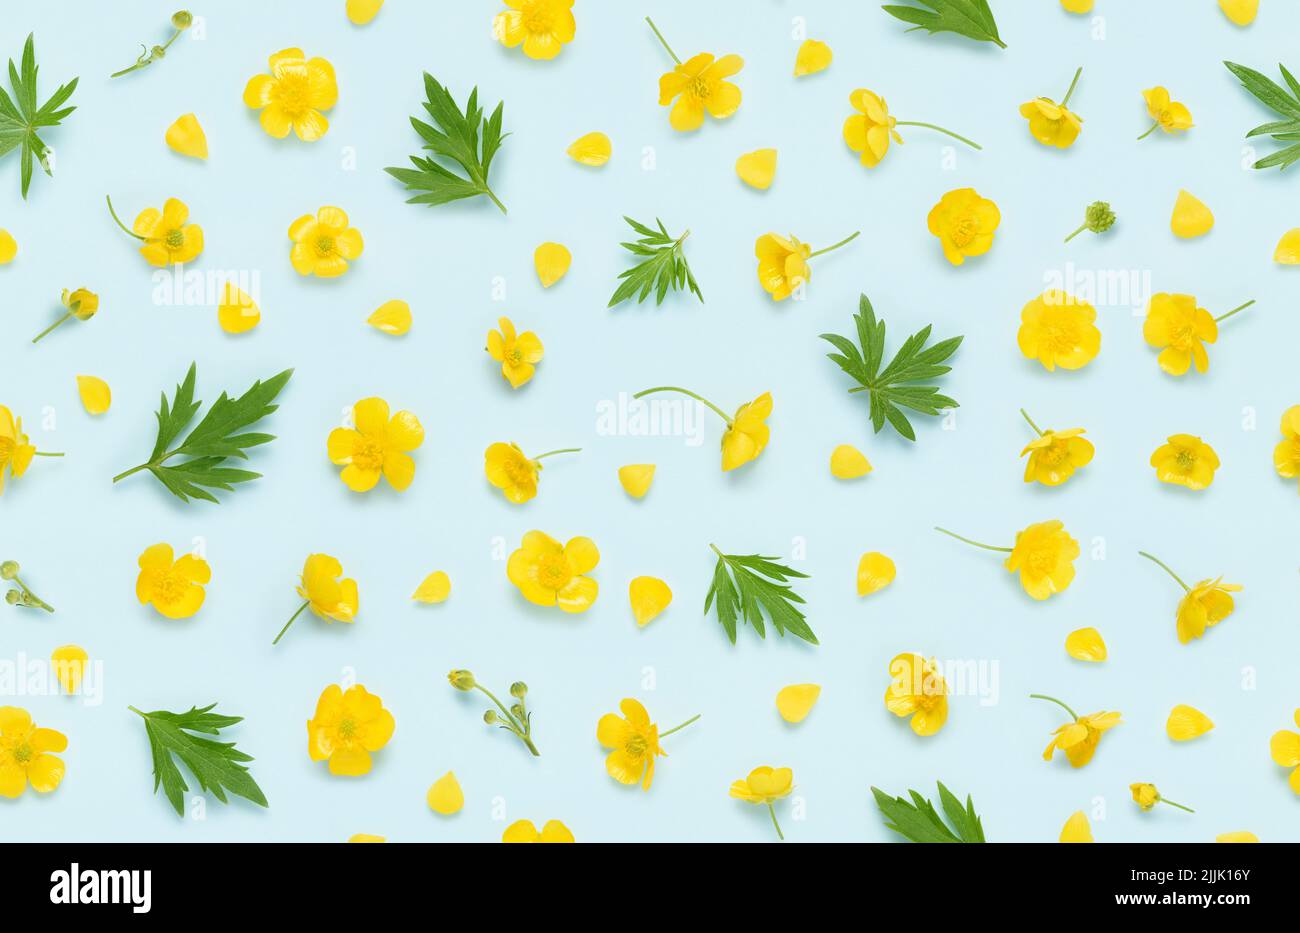 Seamless floral pattern of yellow blooming buttercup, common wild meadow flower, with buds, leaves and petals top view flat lay background. Stock Photo